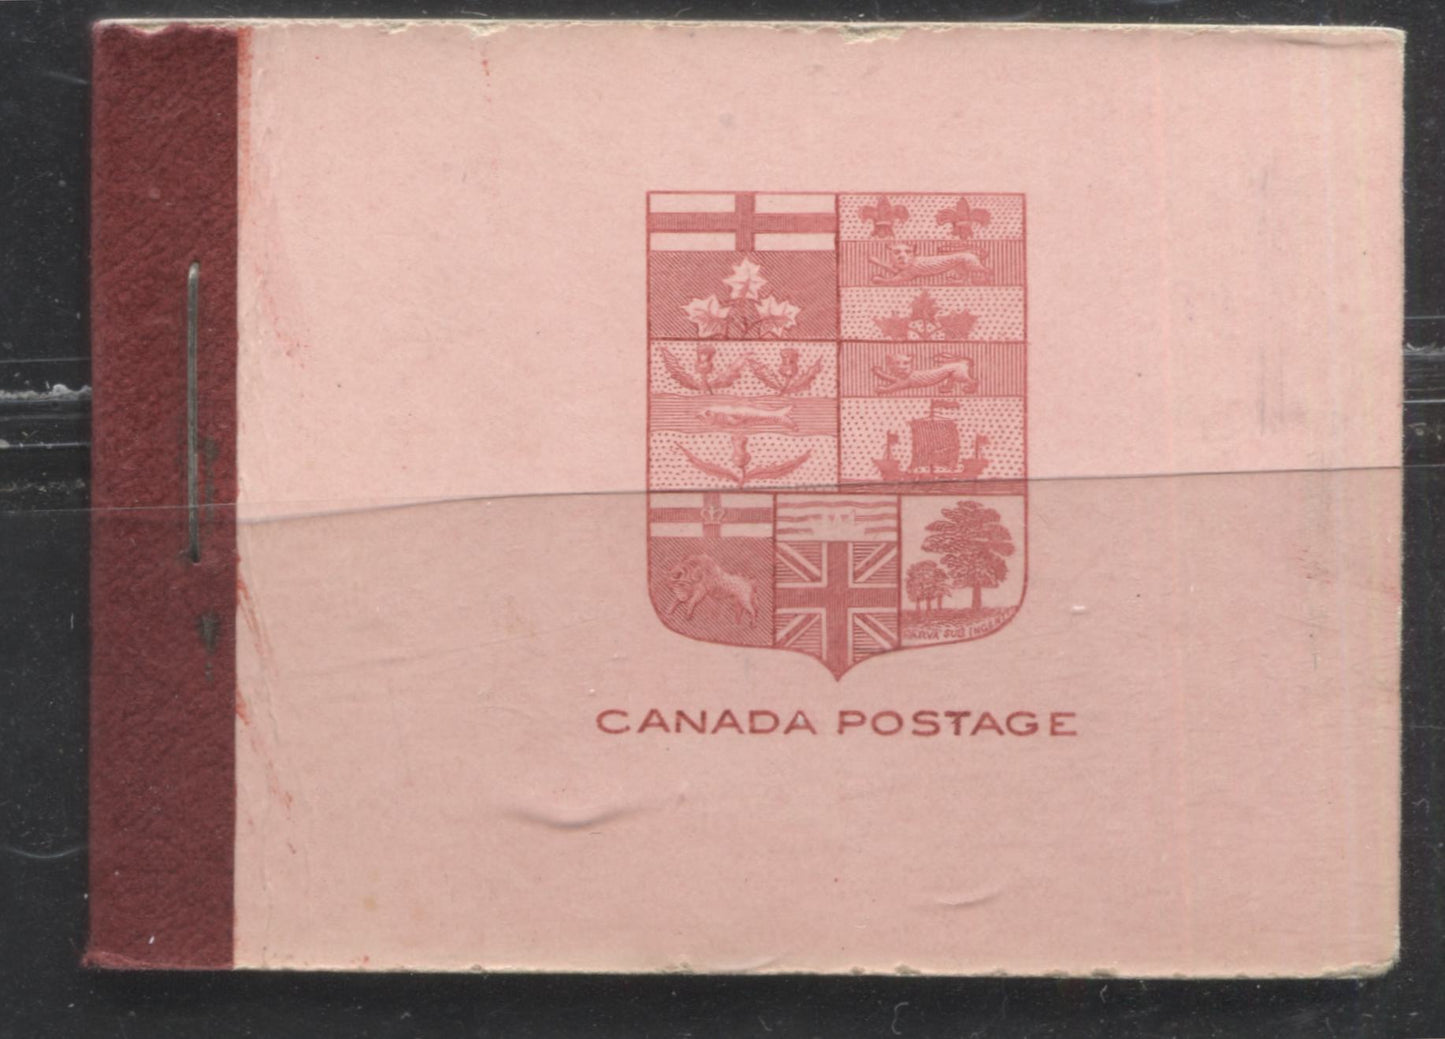 Lot 174 Canada #BK5d 1912-1928 Admiral Issue, Complete 25¢ English Booklet, Carmine Lake Binding Tape, Vertical Wove Paper, Bright Carmine Red on Pink Cover, Deep Rosine Panes, 17.7 mm x 21.5 mm Printing